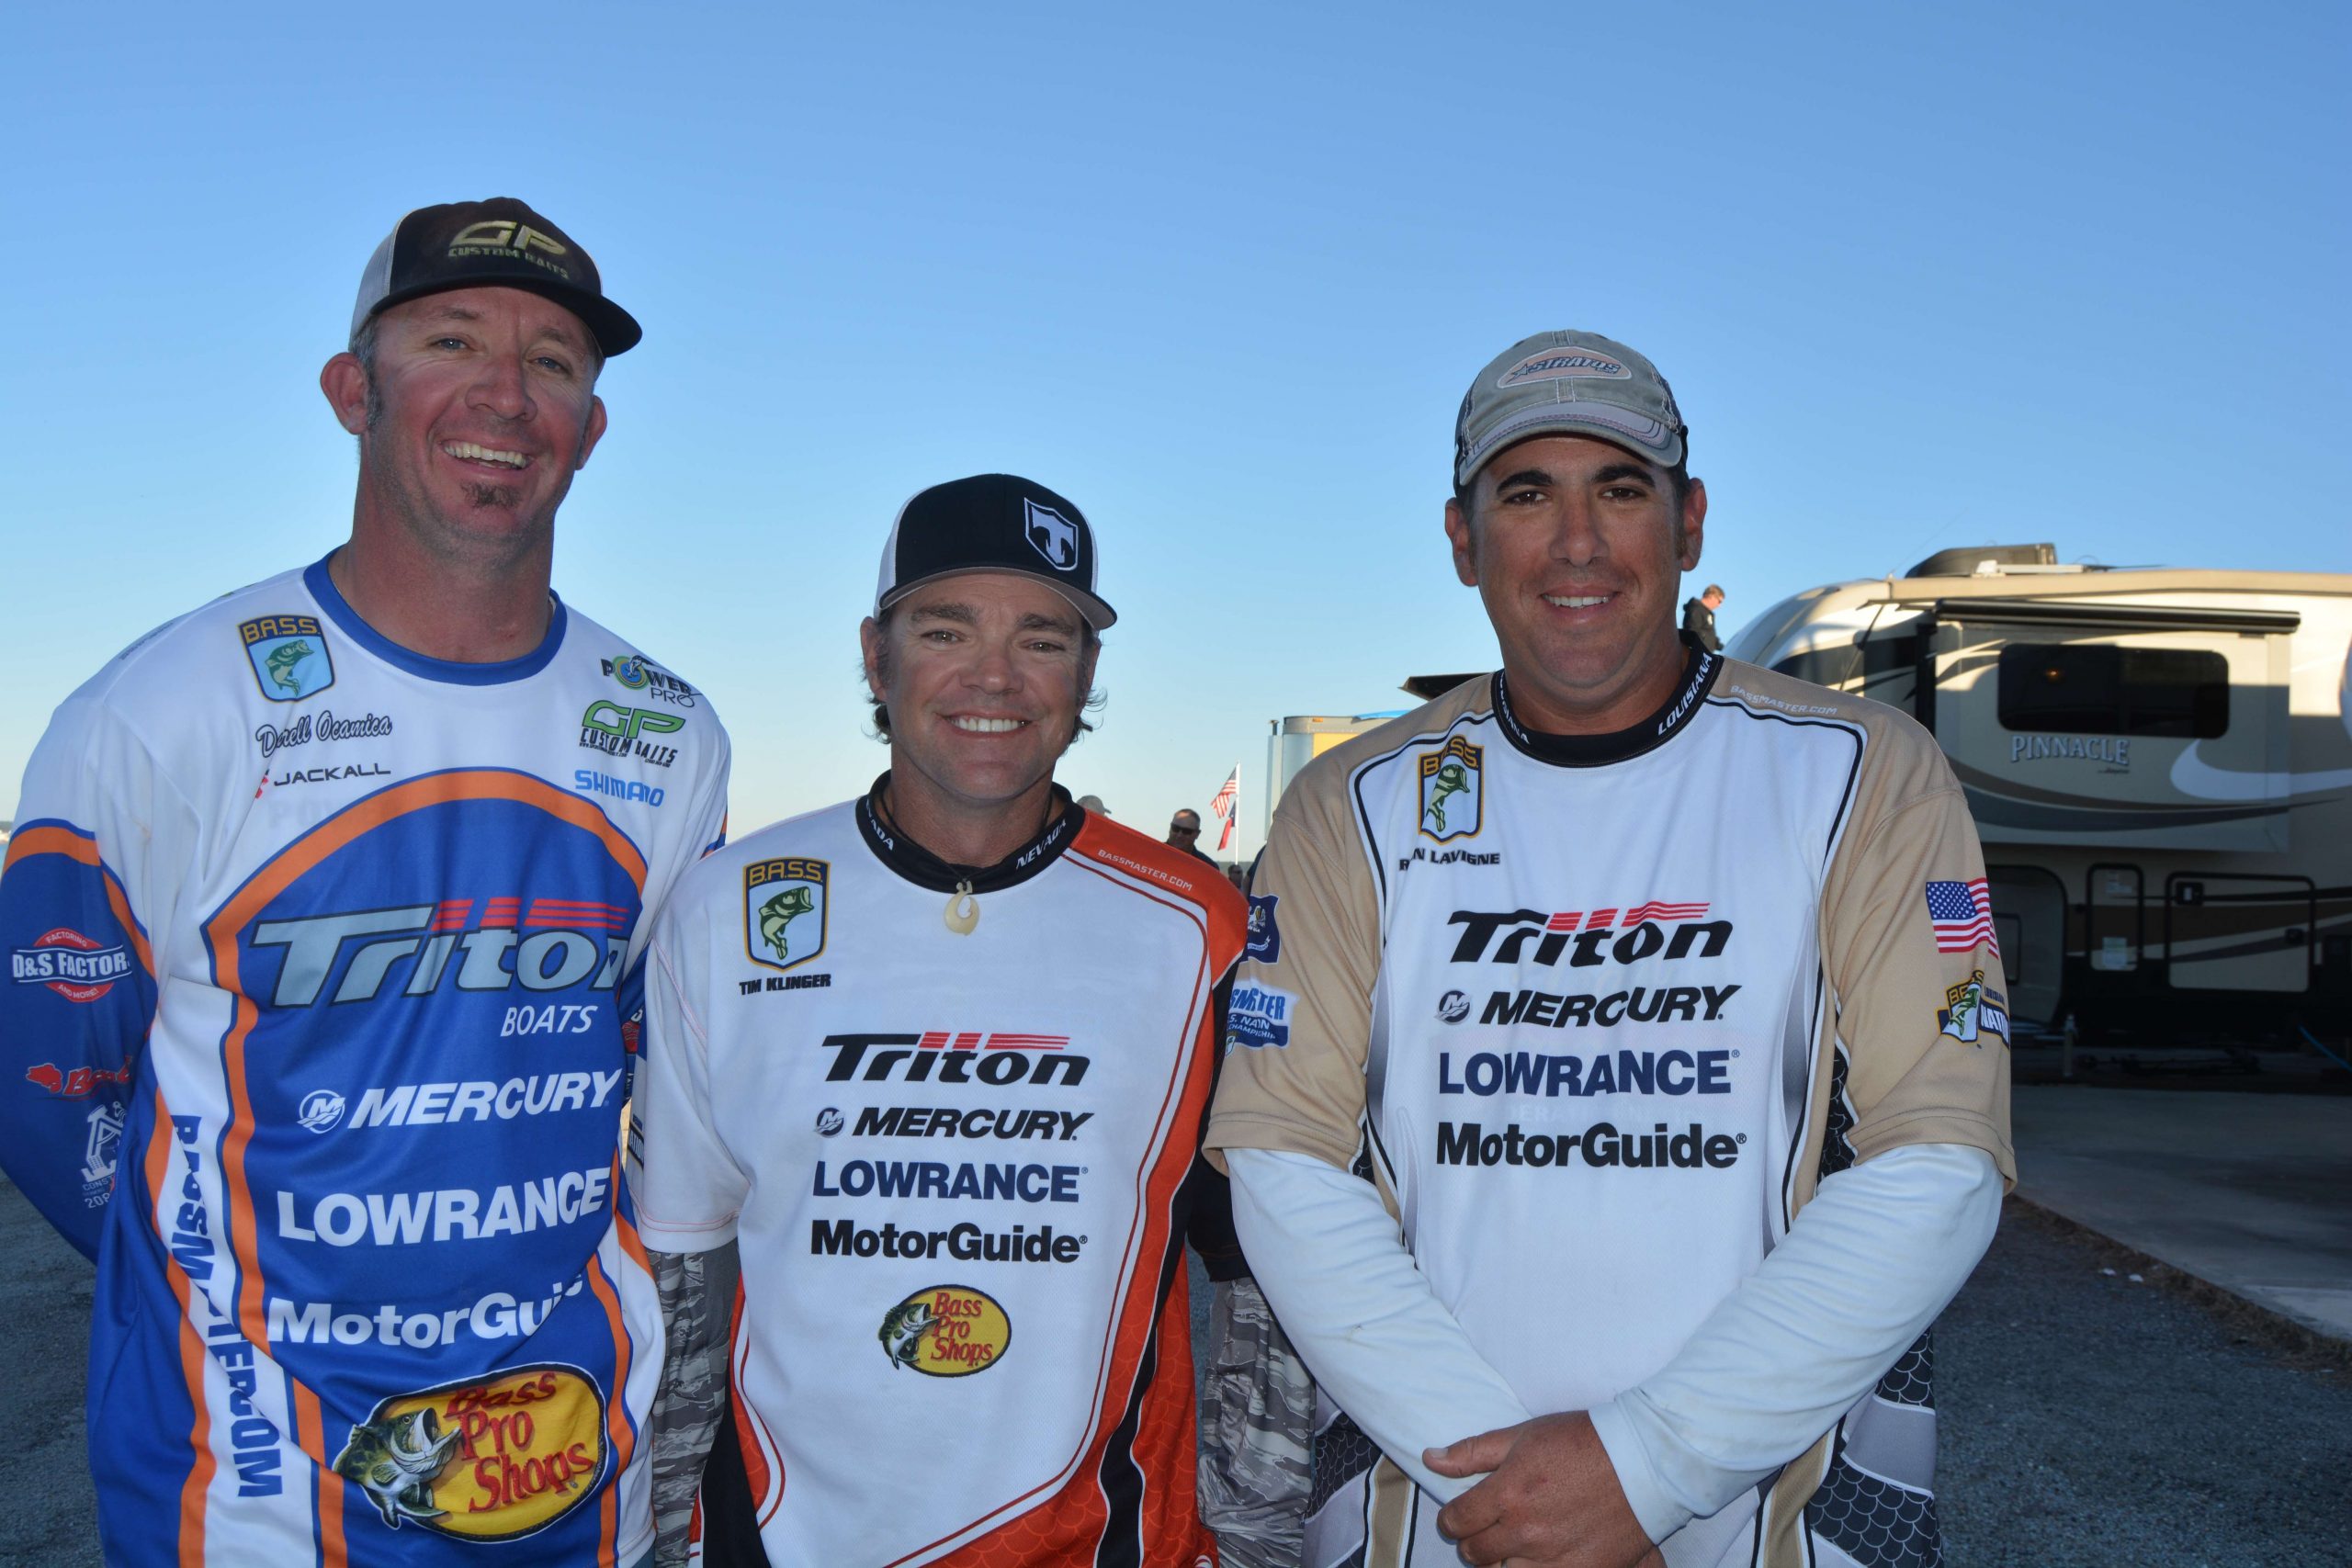 Darrell Ocamica, Tim Klinger and Ryan Lavigne will meet again, right here, in March 2017 to compete in their first Classic.